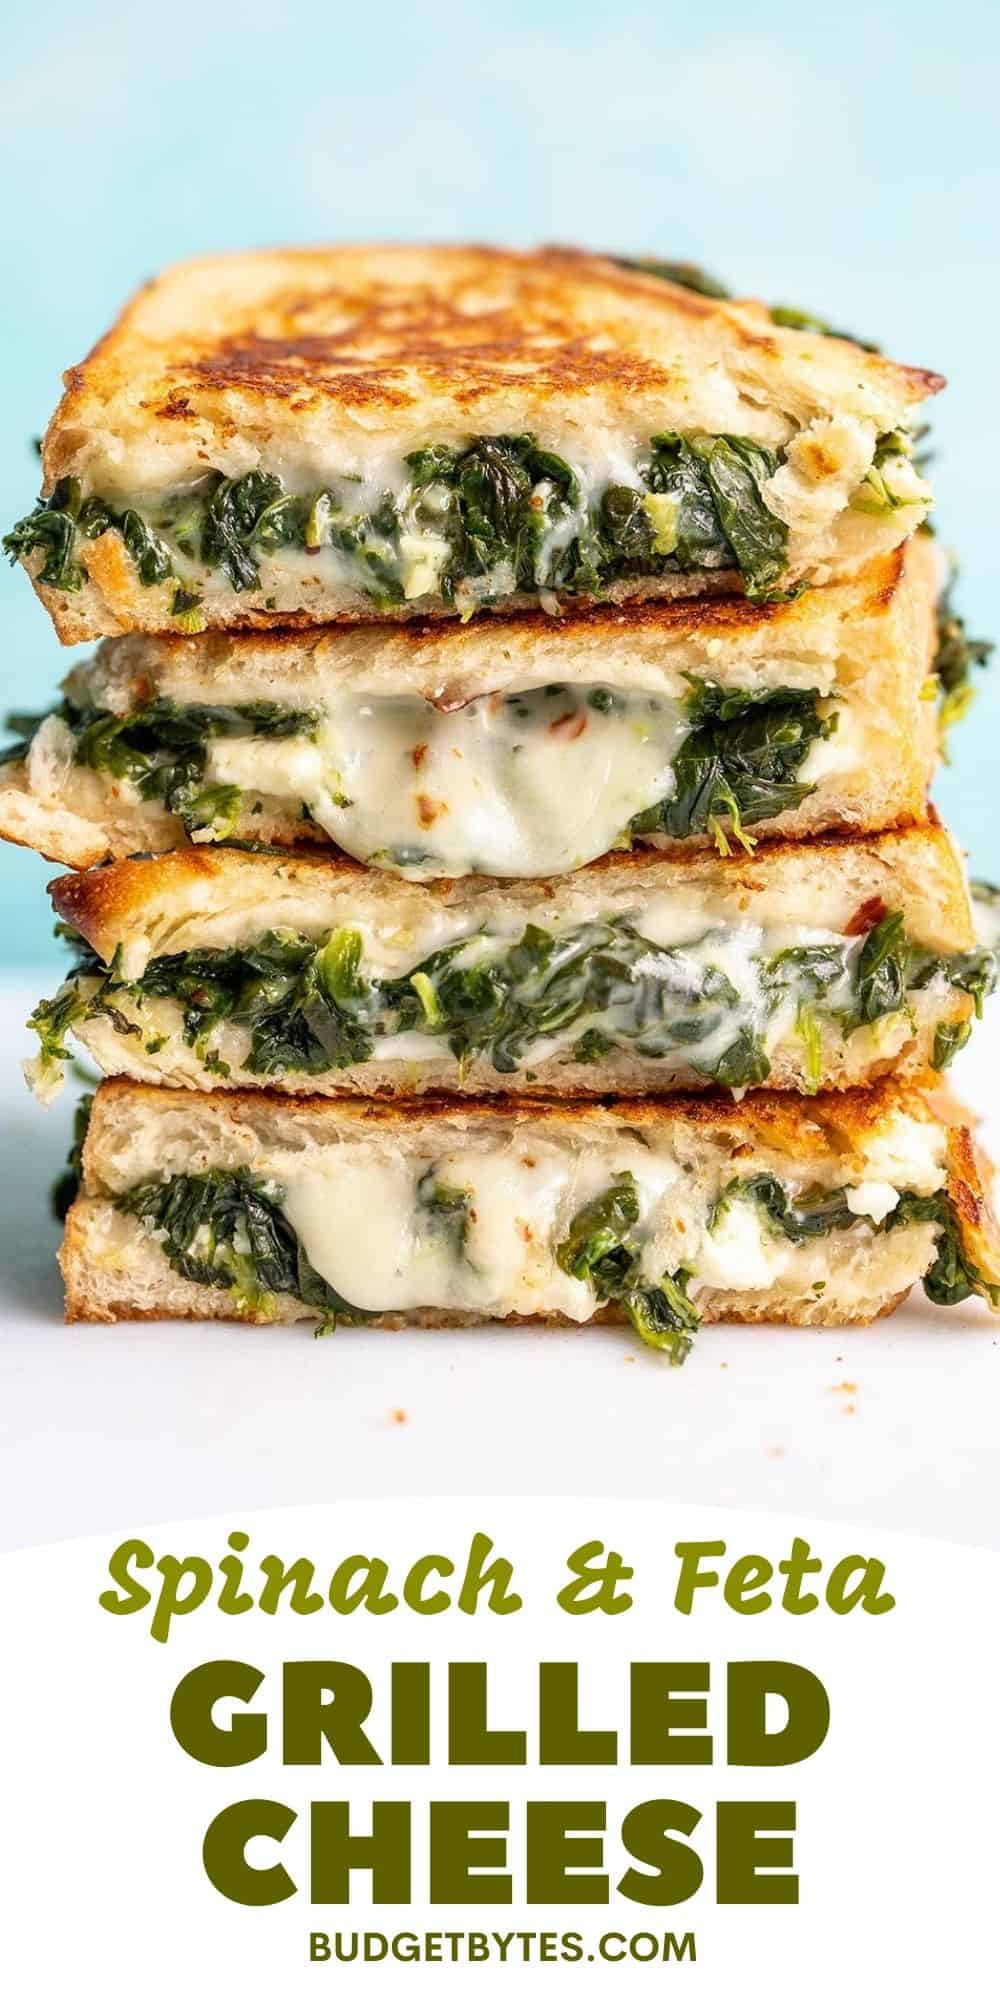 Spinach and Feta Grilled Cheese - Budget Bytes